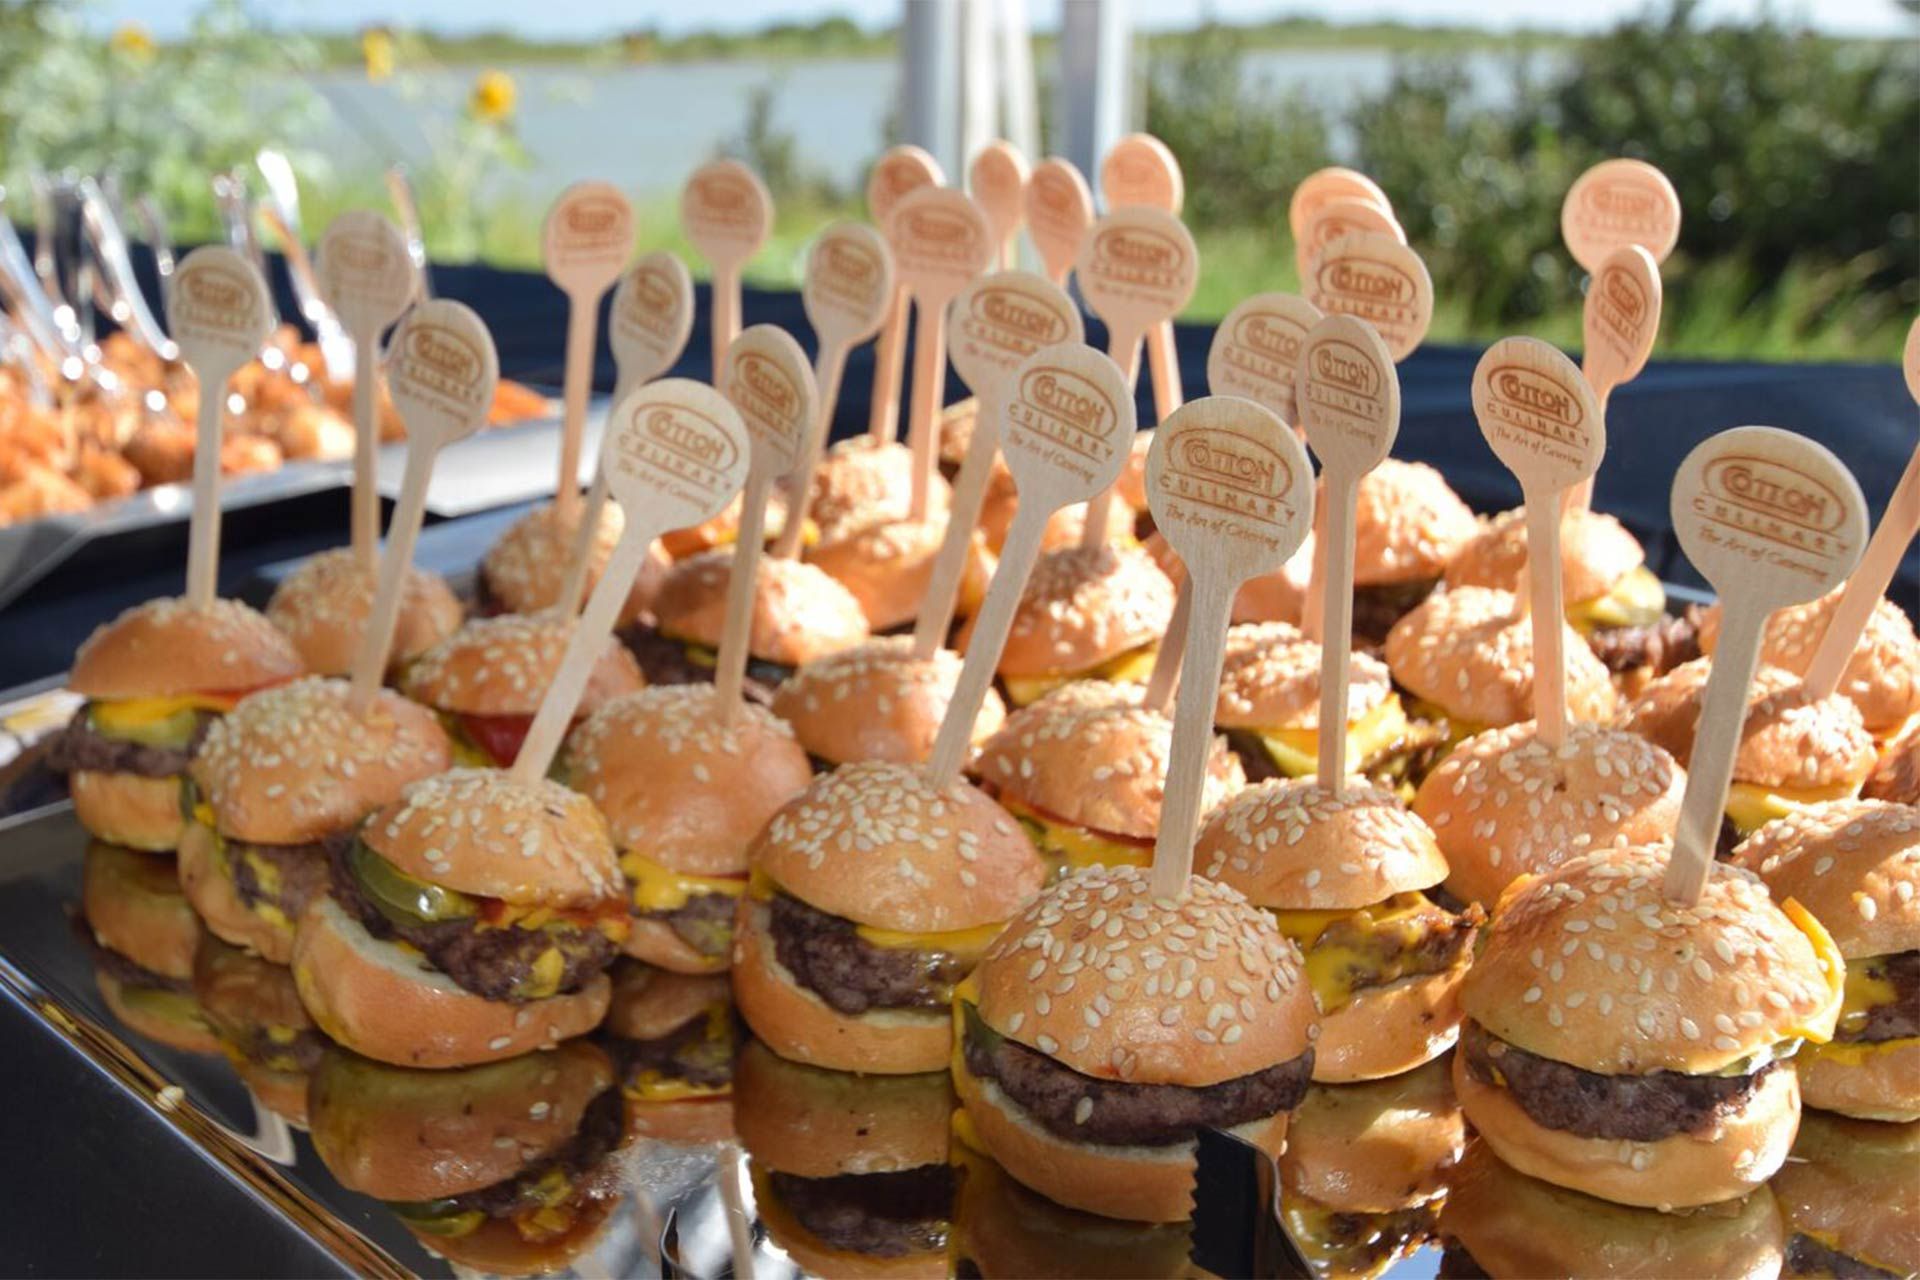 Corporate Caterers